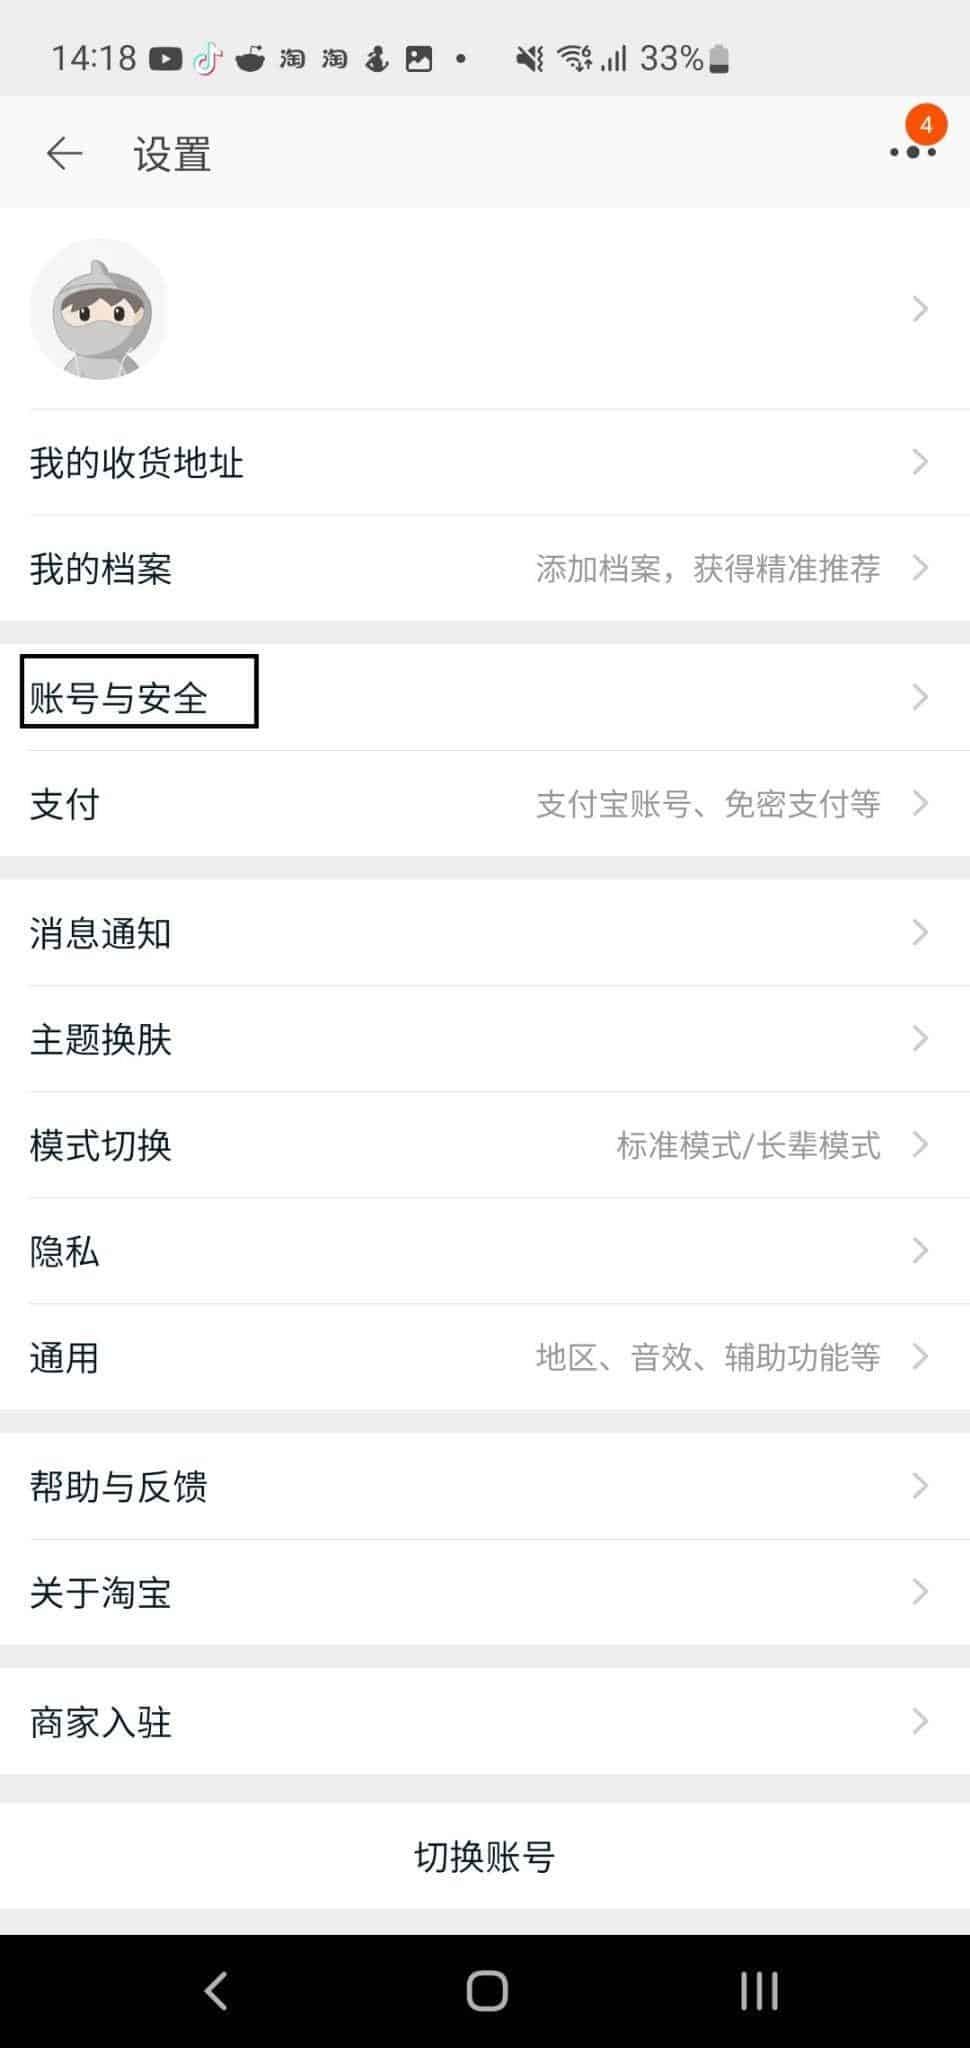 Change your password on mobile to fix Taobao login problem